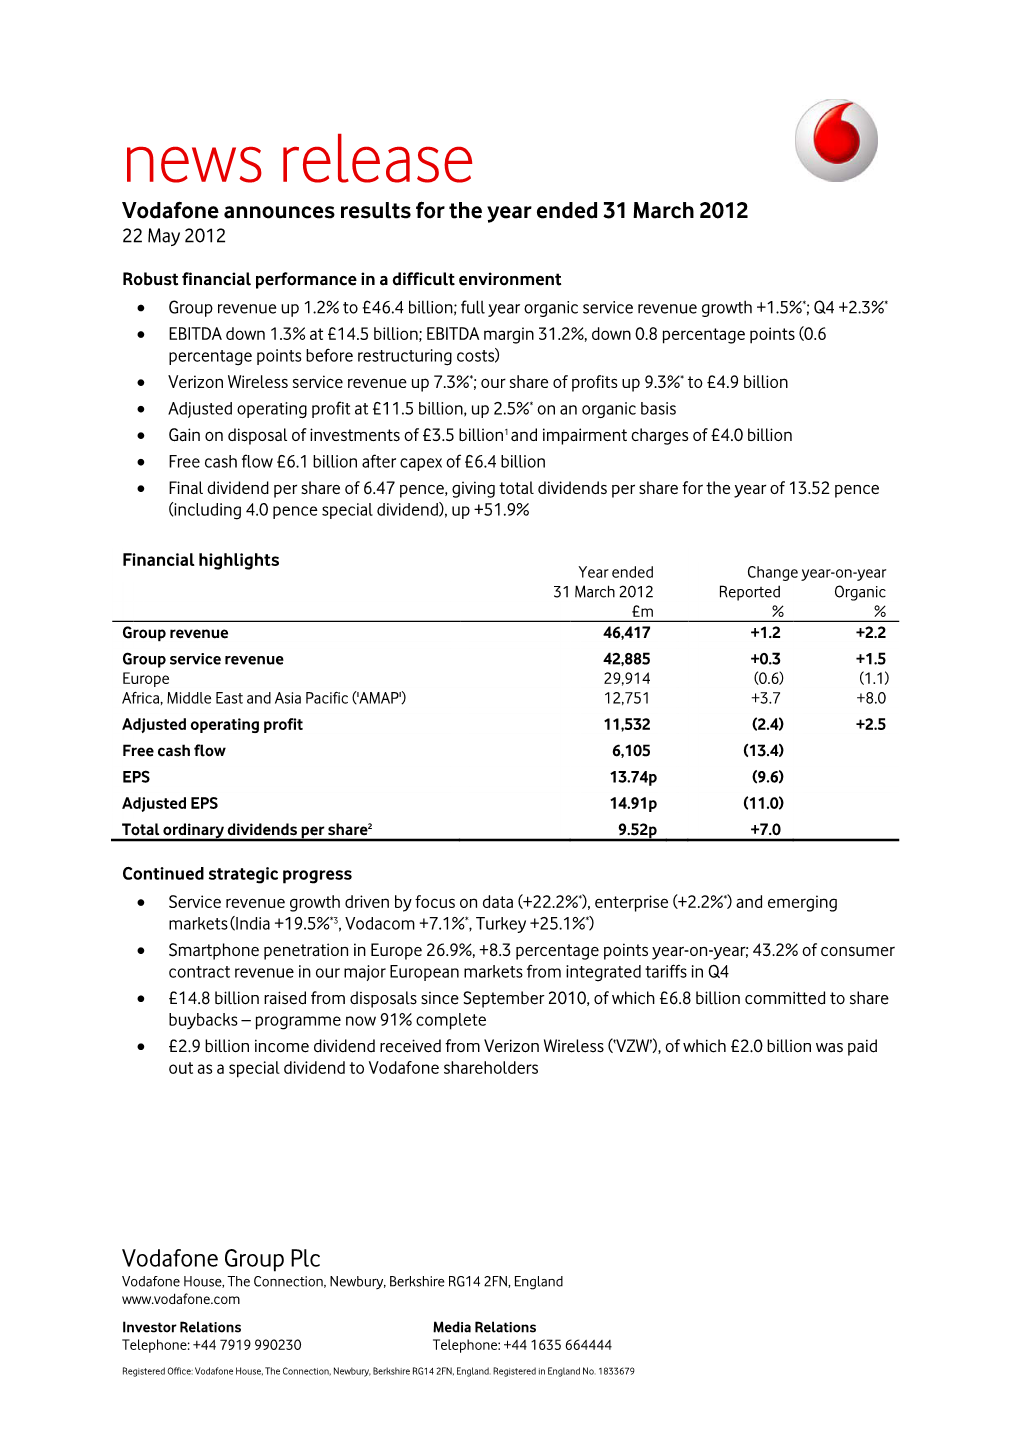 News Release Vodafone Announces Results for the Year Ended 31 March 2012 22 May 2012